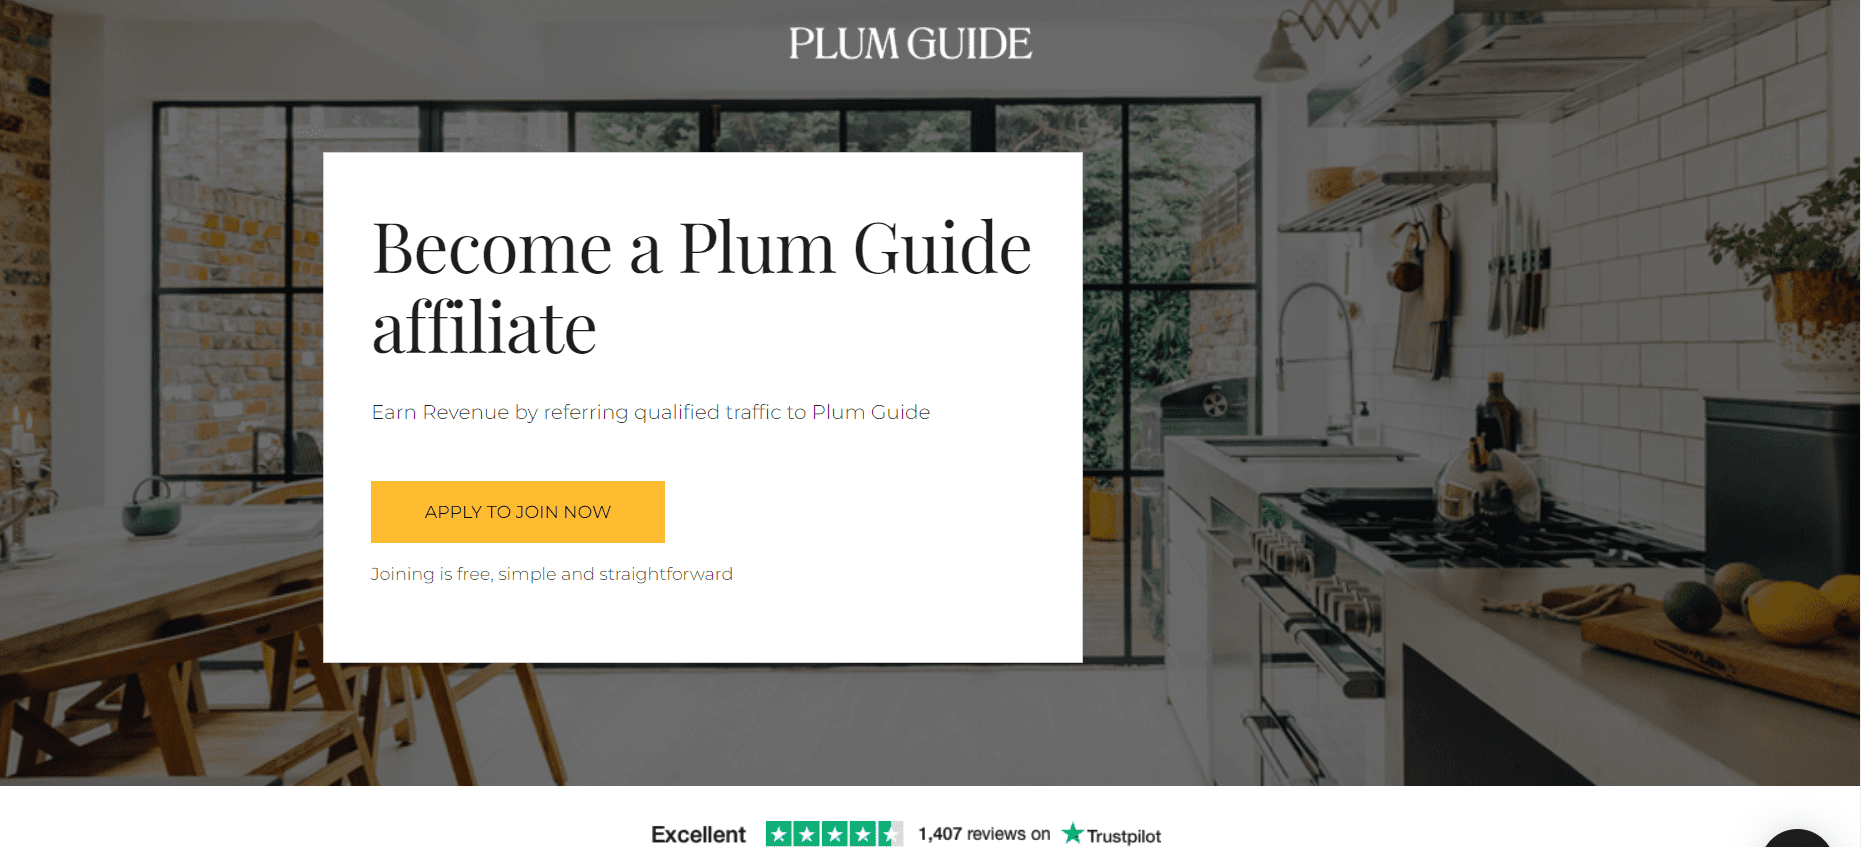 Plum Guide Overview